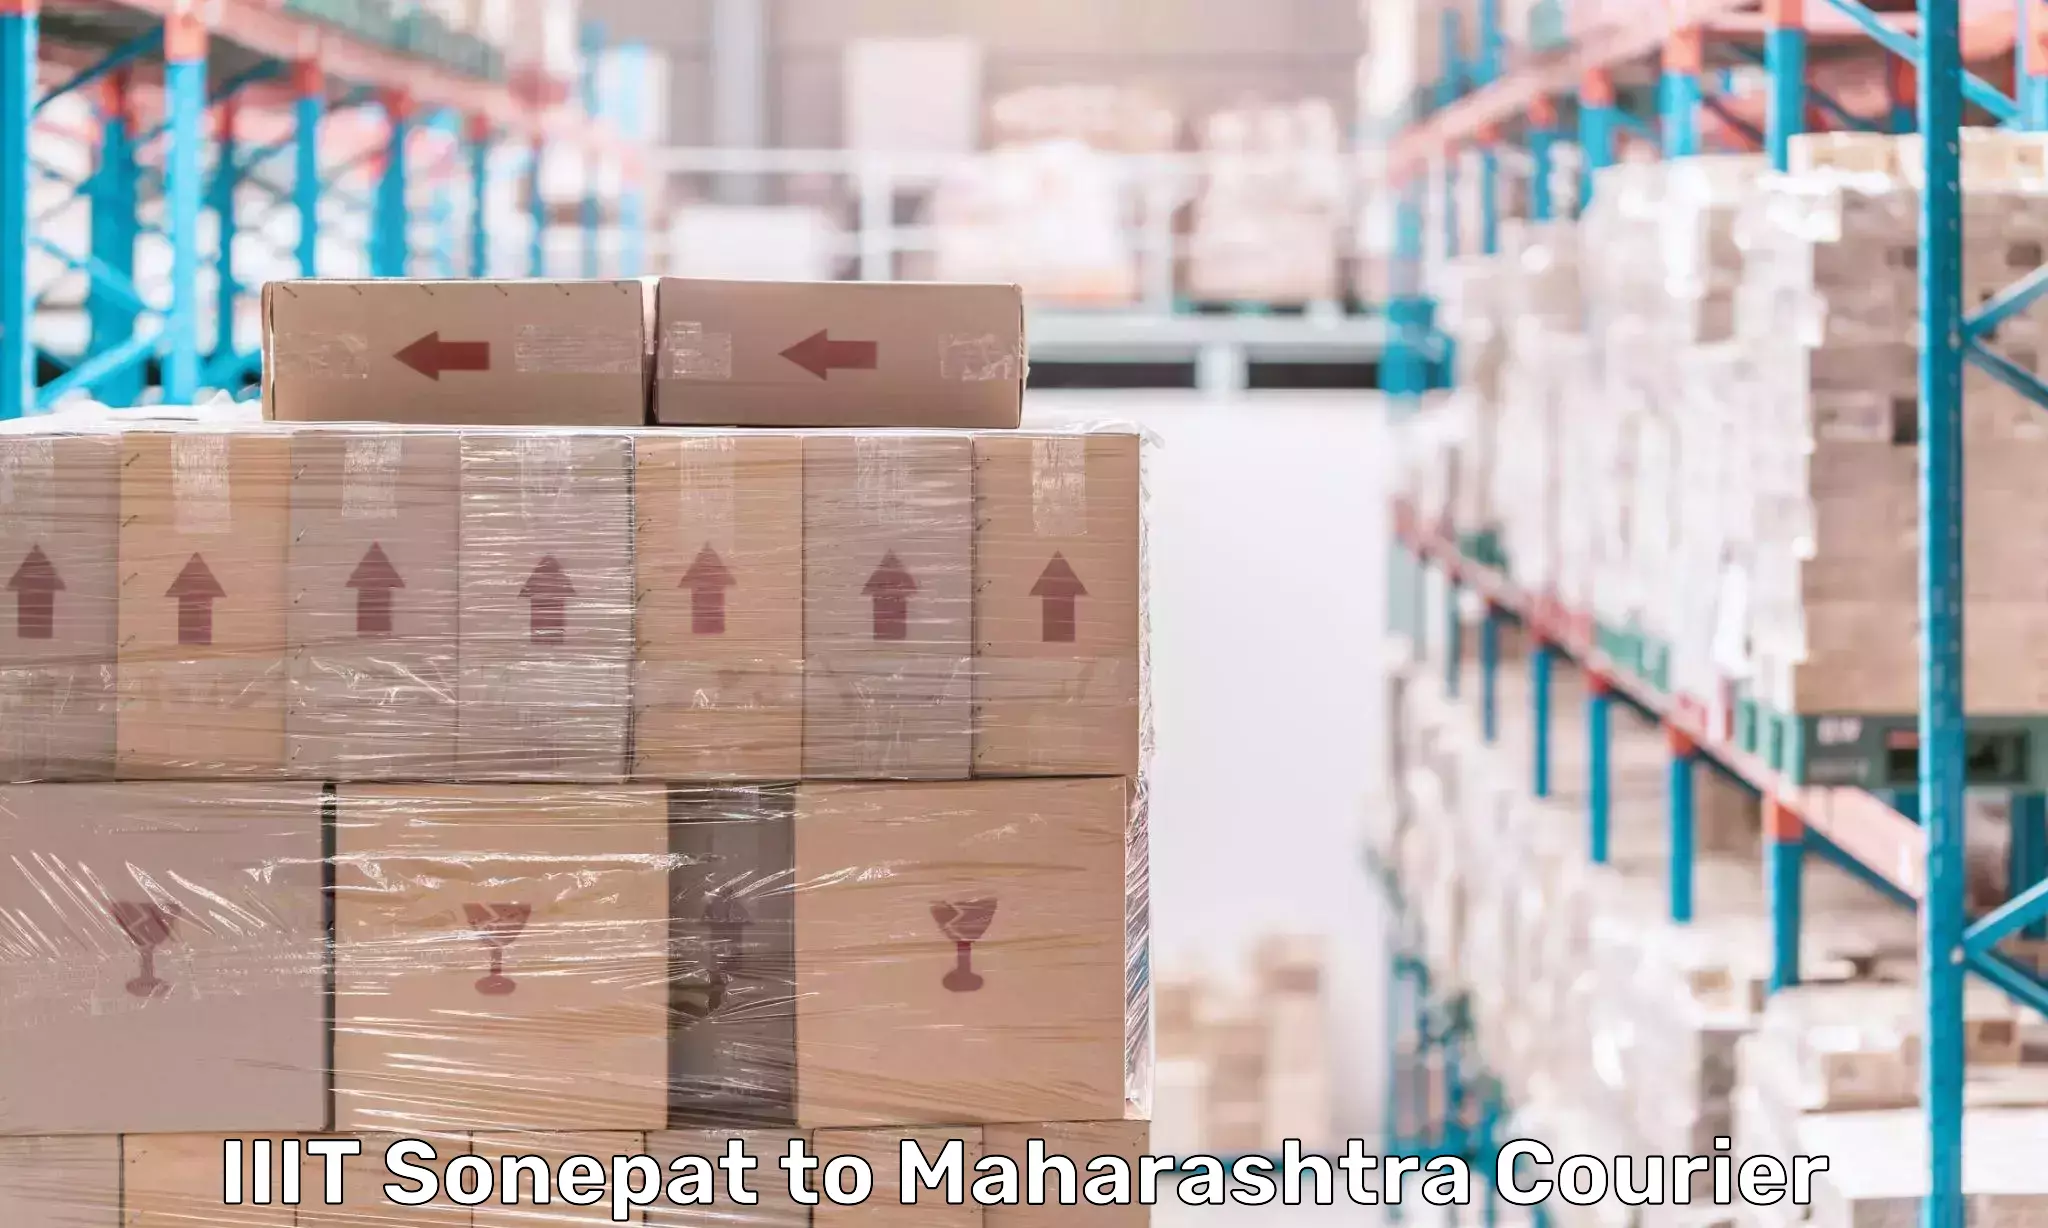 Next-day delivery options IIIT Sonepat to Pune